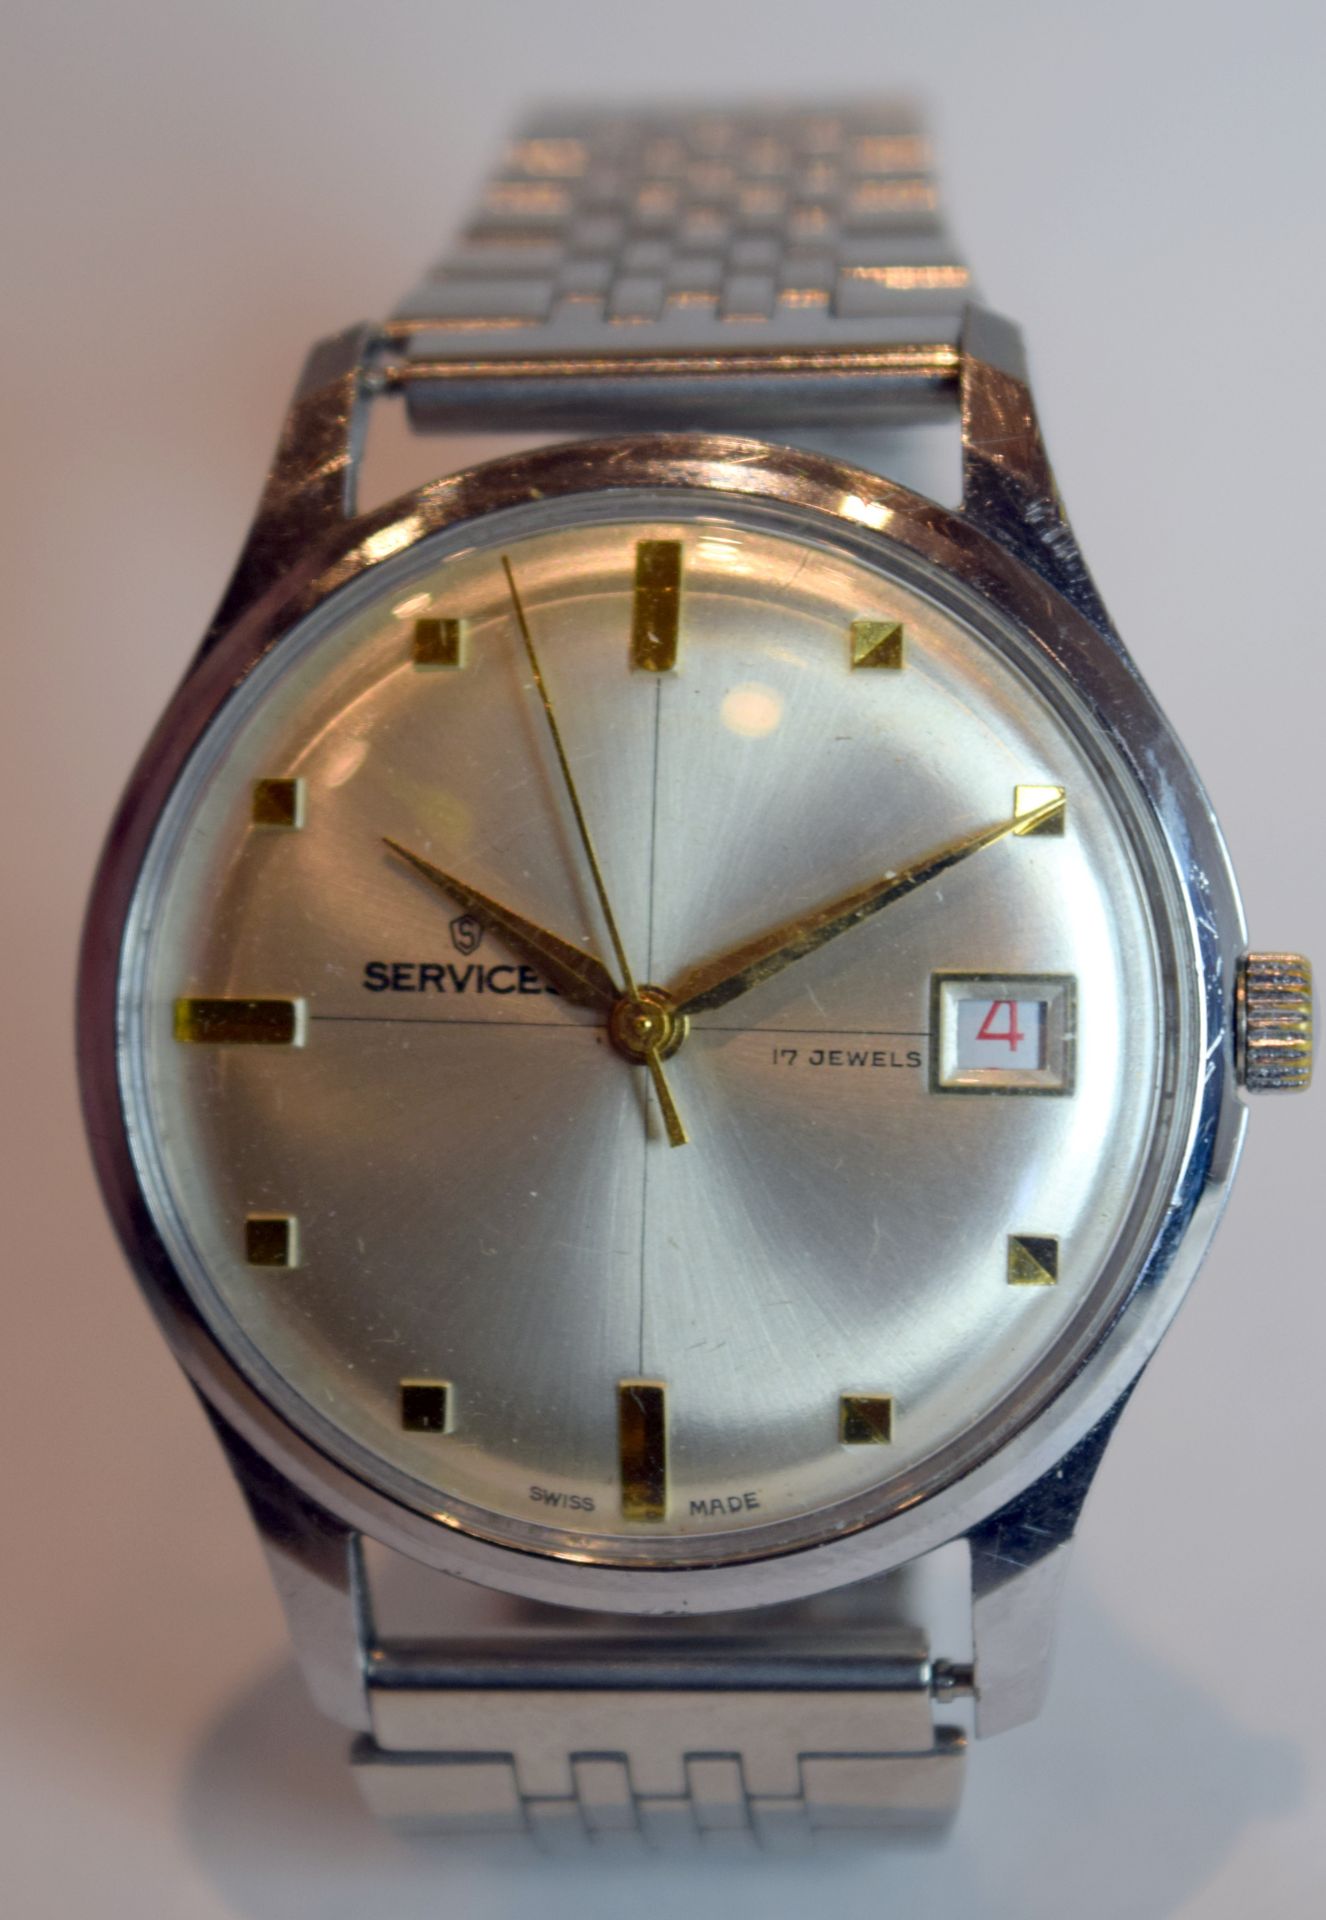 Services 17 Jewels Imperios Manual Winding Calendar Watch On SS Bracelet 1960s NO RESERVE!